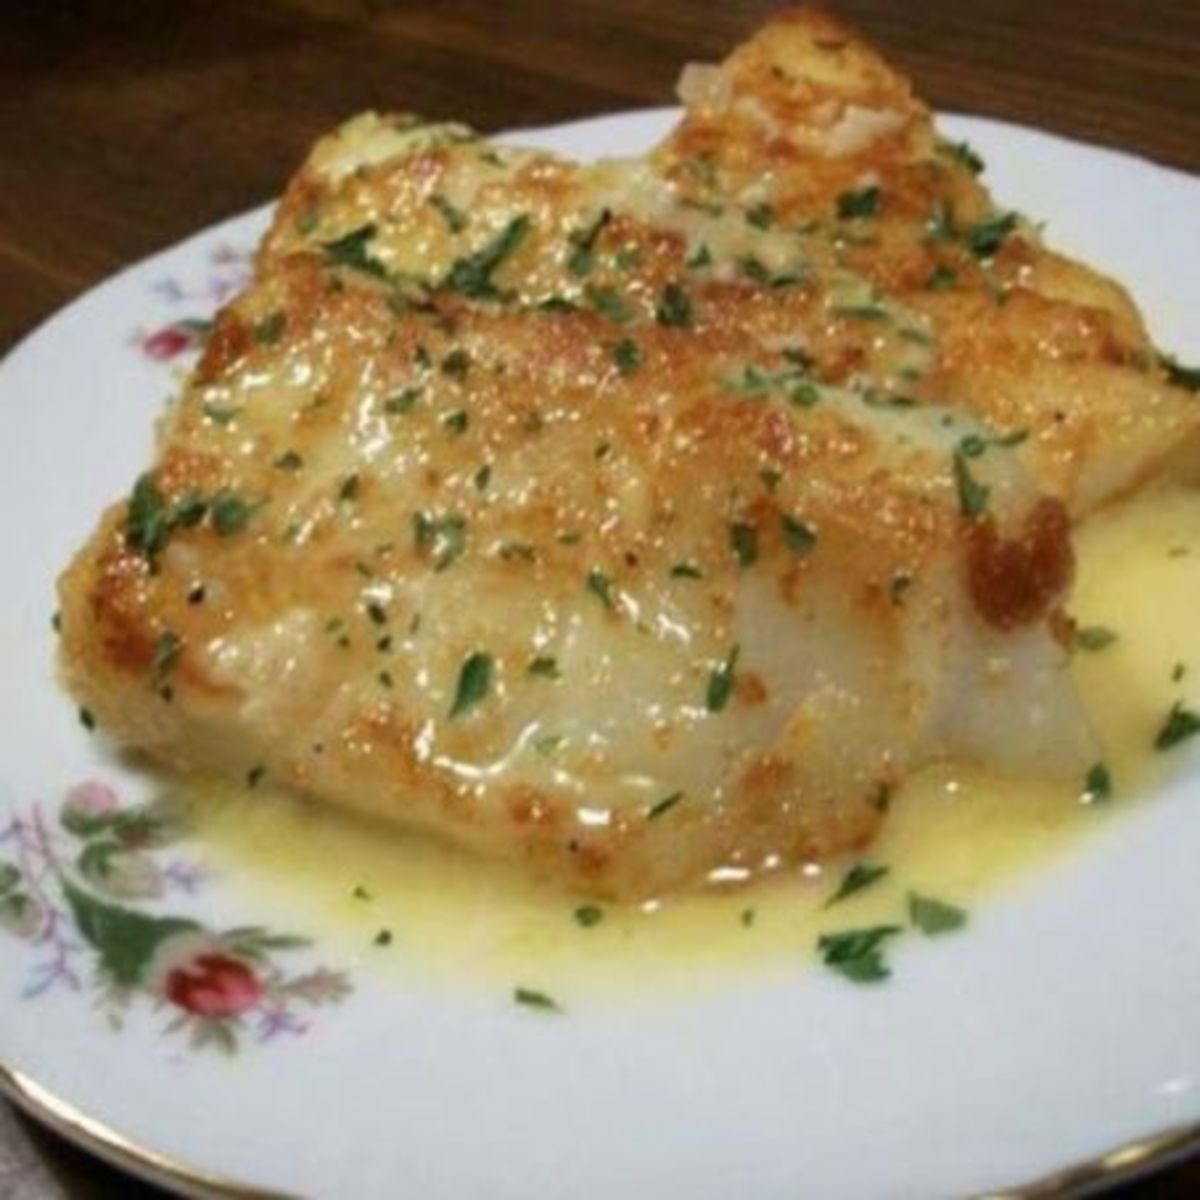 When cooking Cod Fish, I feel the best way to prepare is to bake it in the oven until the Cod reaches a temperature of 145 degrees for flaky tender fish that will melt in your mouth.